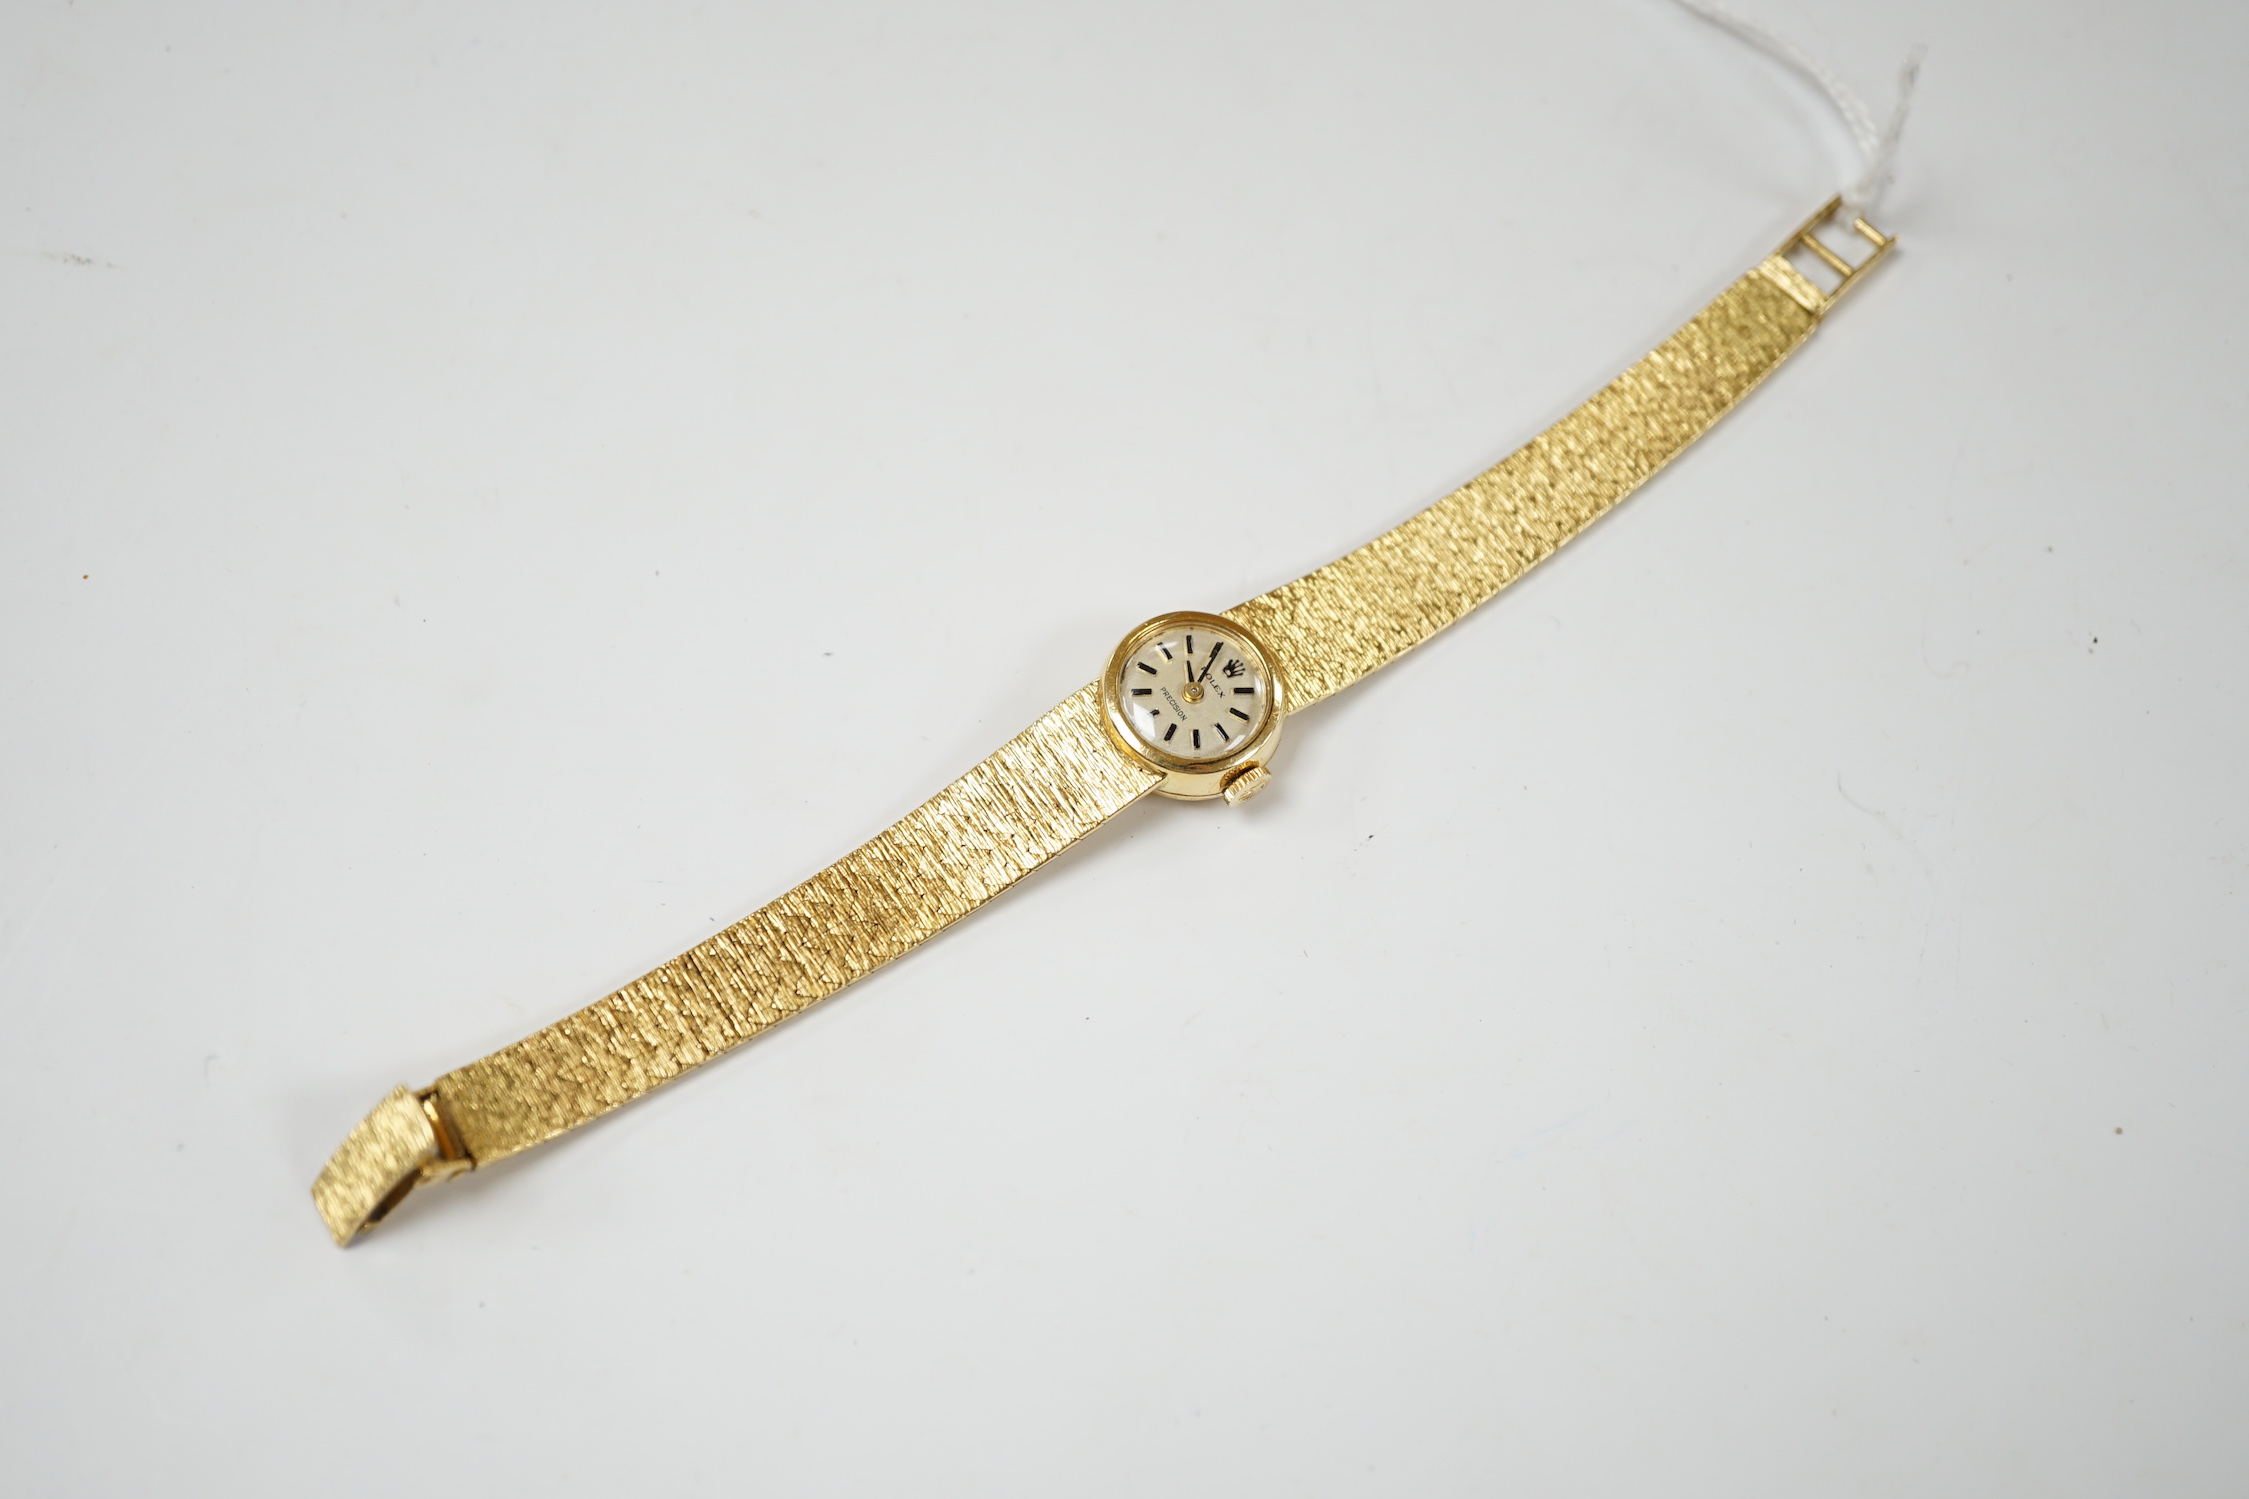 A lady's textured 750 yellow metal Rolex manual wind wrist watch, on integral bracelet, no box or papers, case diameter 15mm